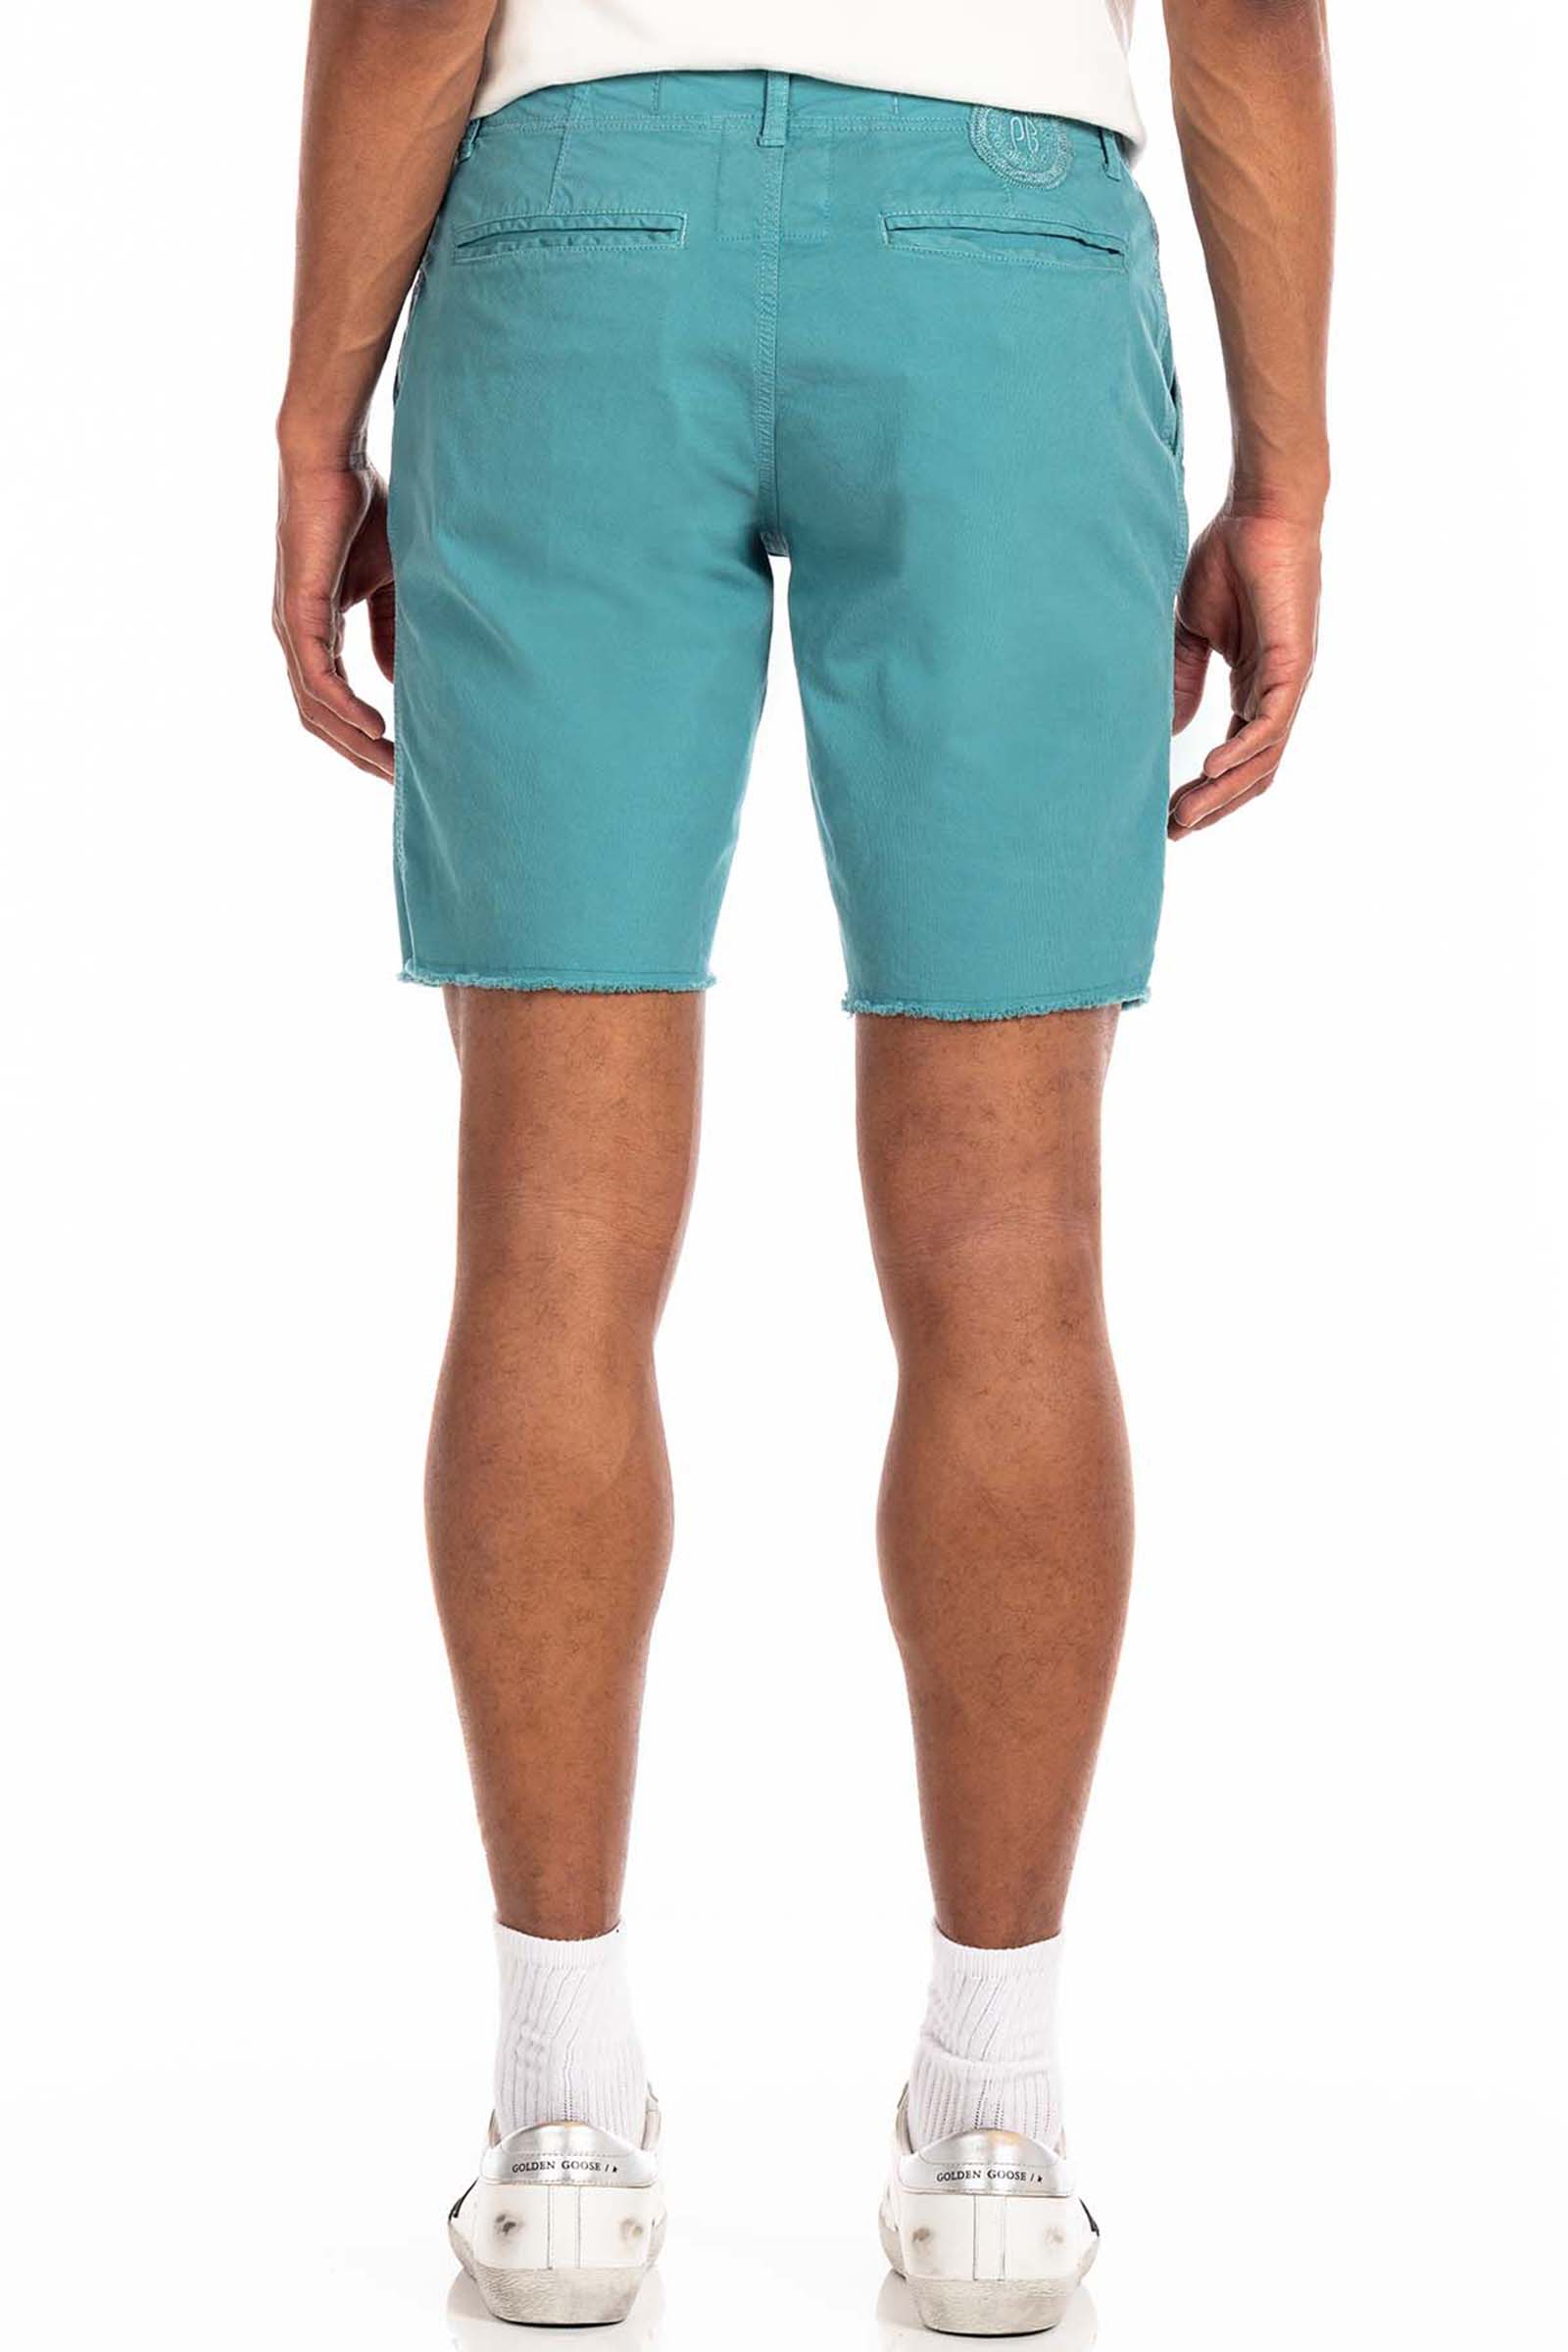 Original Paperbacks Brentwood Chino Short in Spearmint on Model Cropped Back View